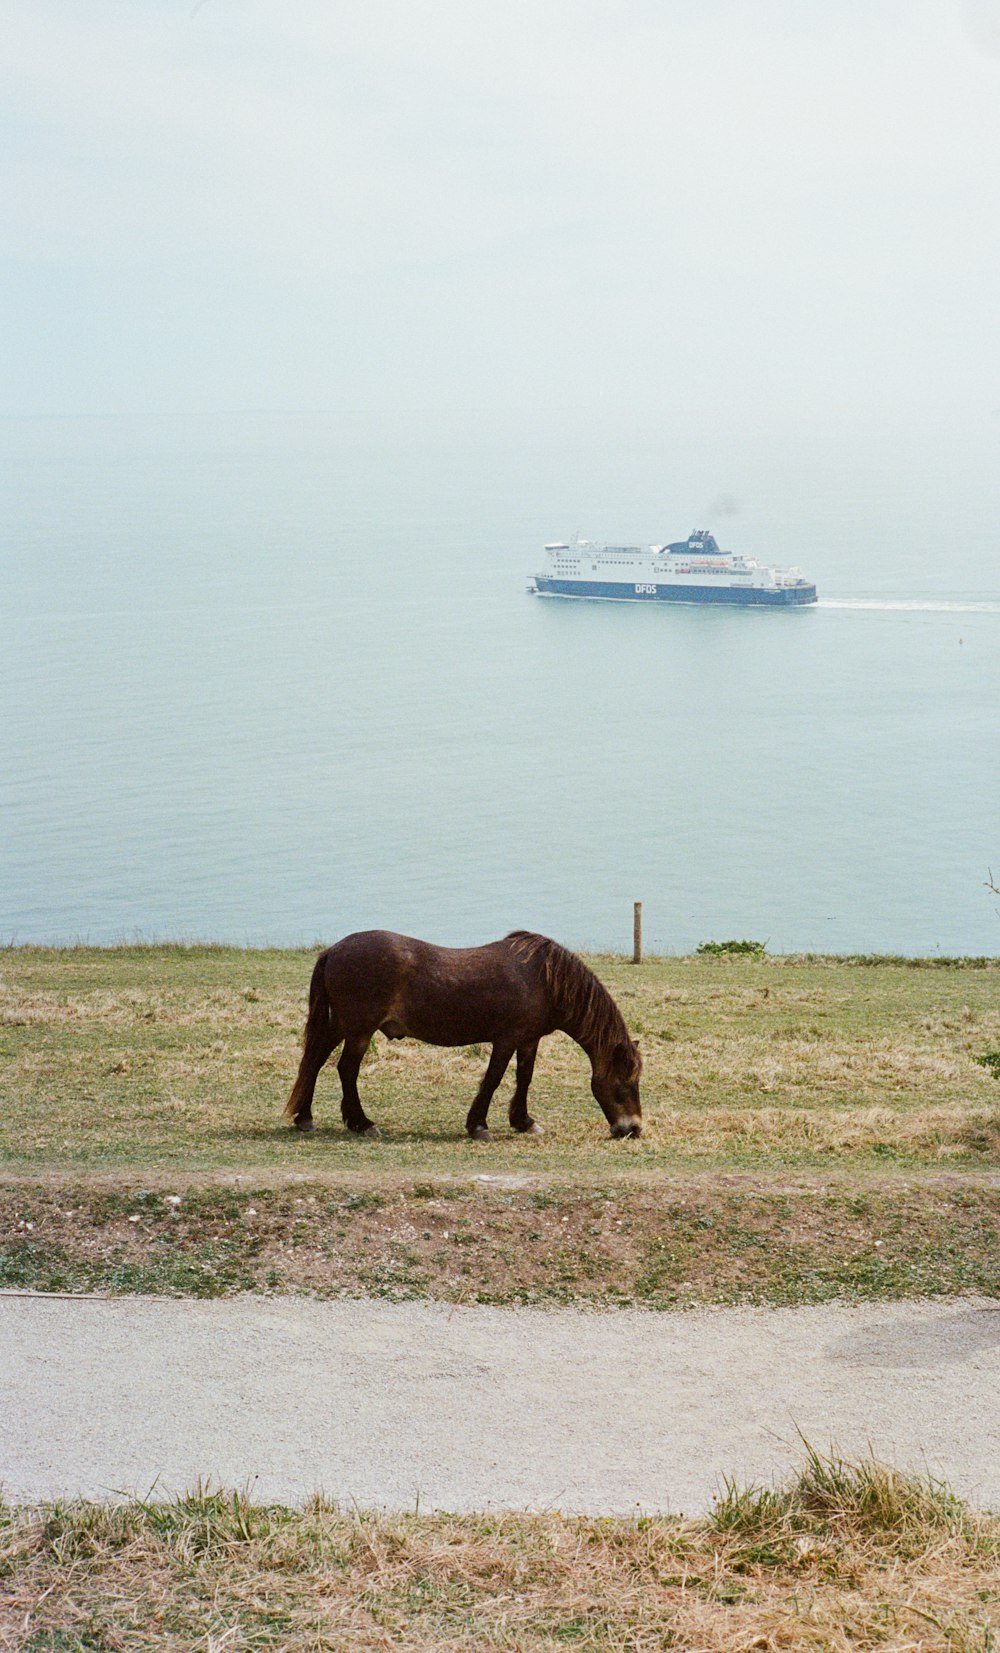 a horse grazing in a field next to the ocean